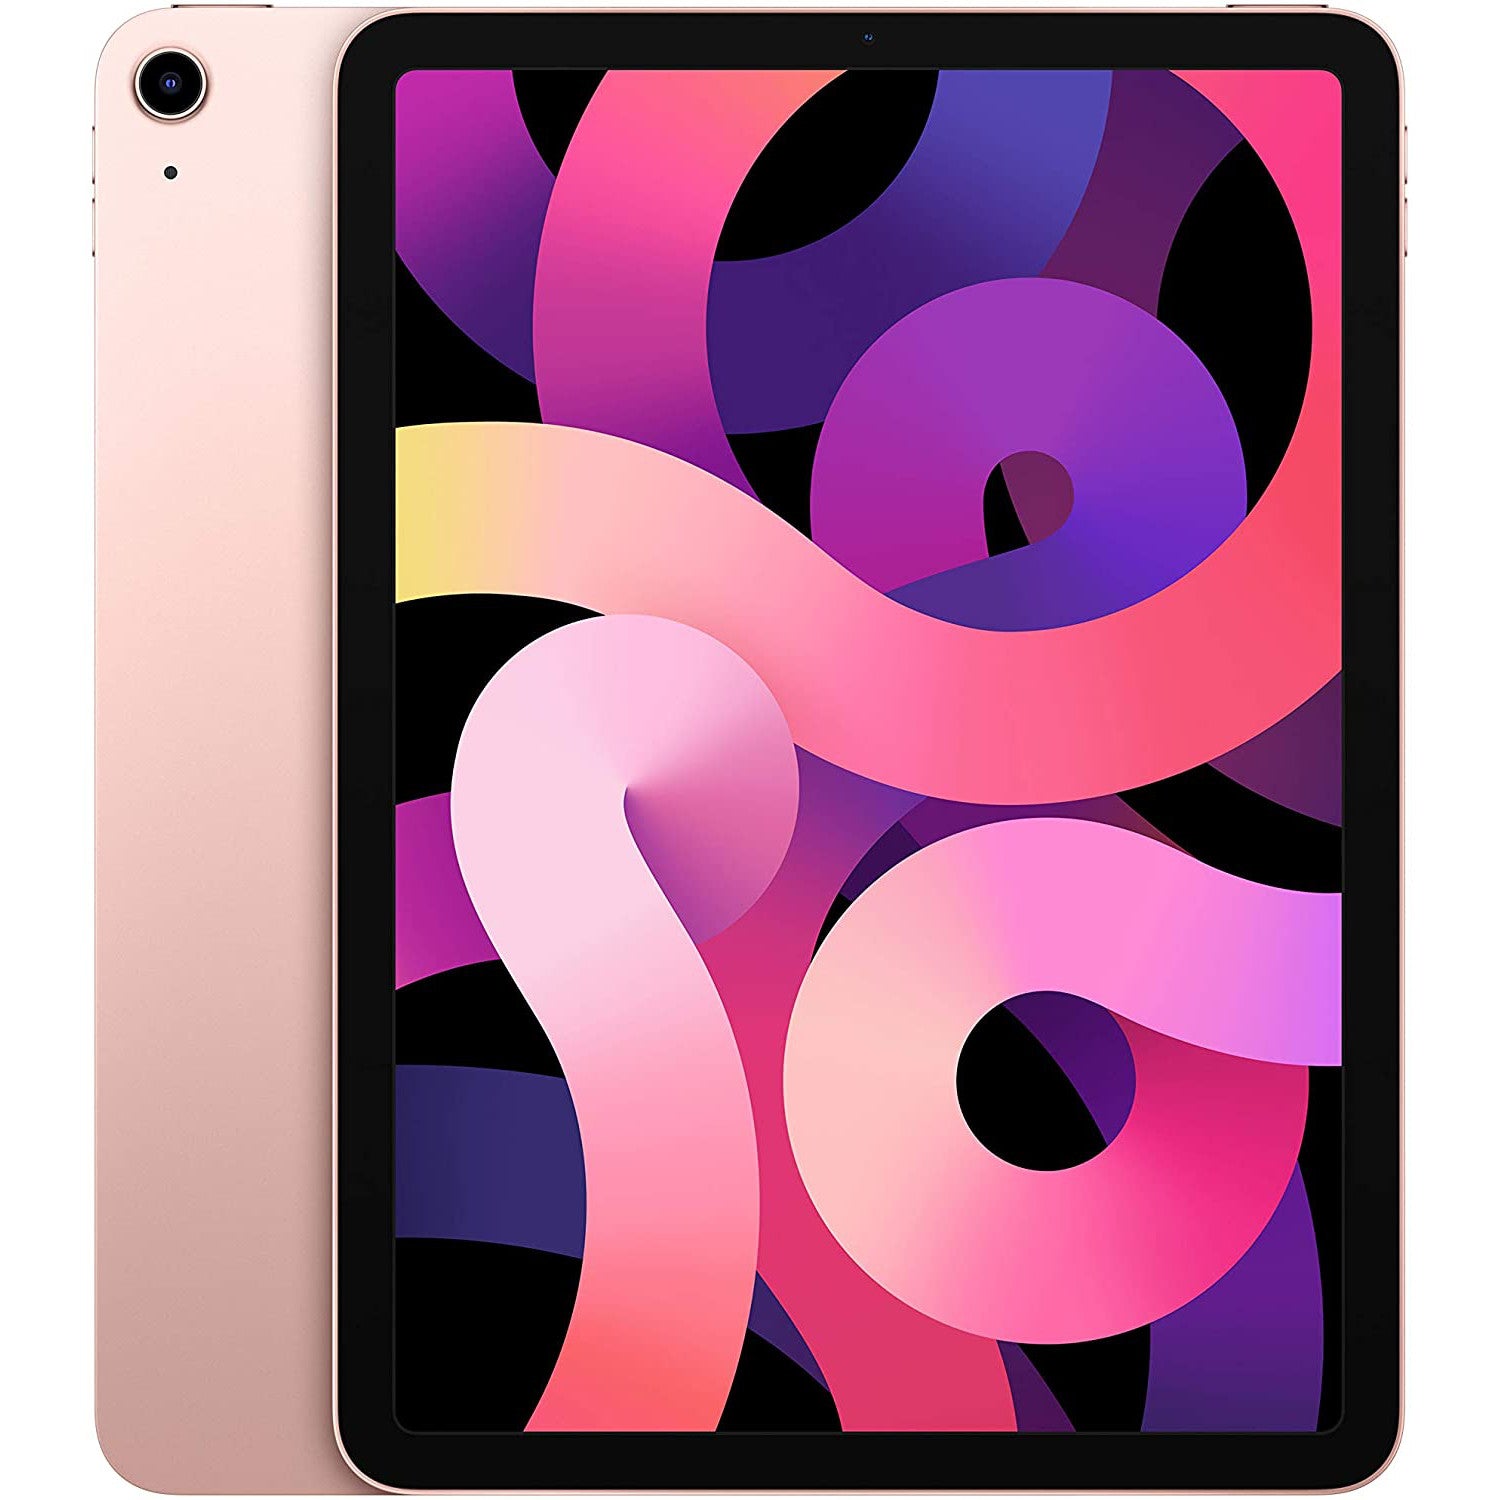 iPad Air 4 256GB WiFi & Cellular - Oro rosa - Impecable